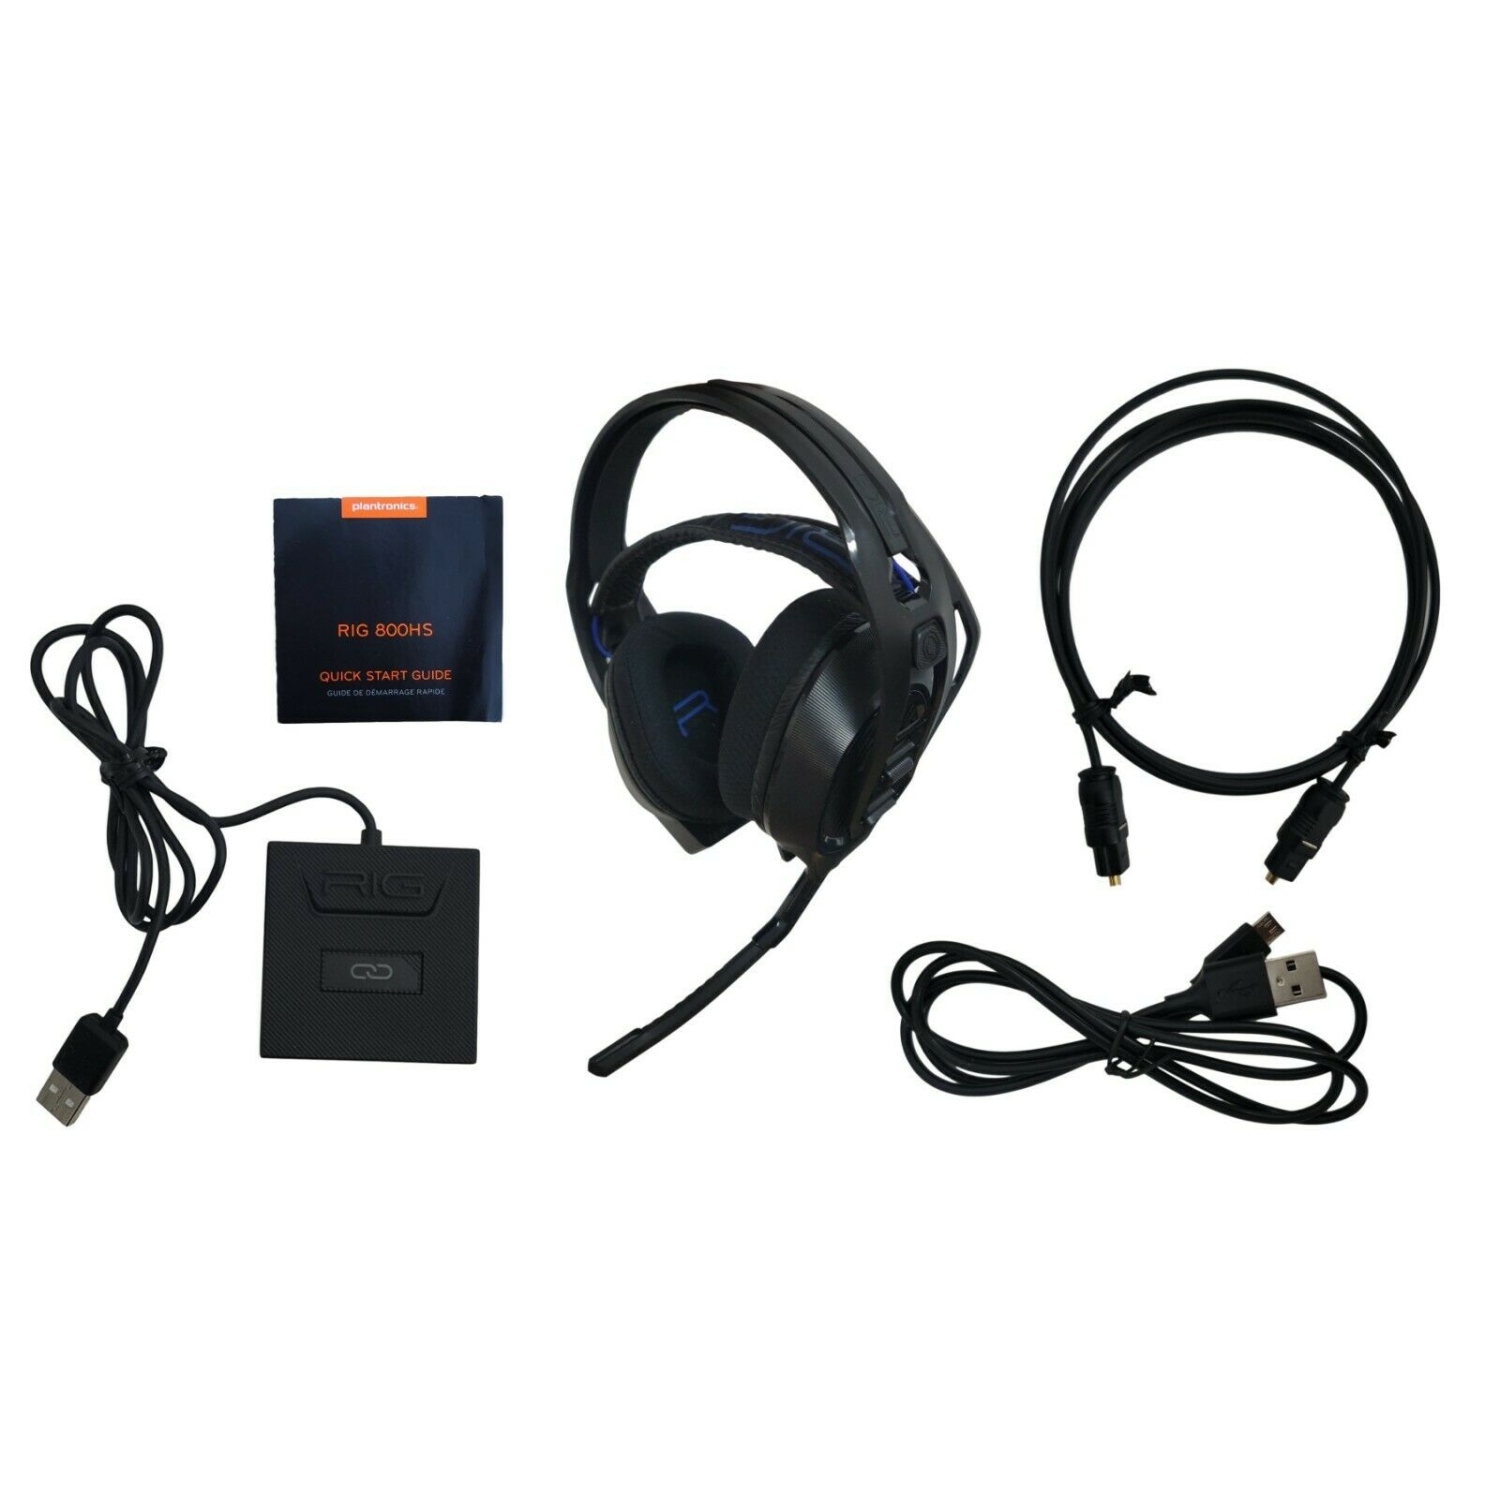 plantronics rig 800hs wireless headset for playstation 4